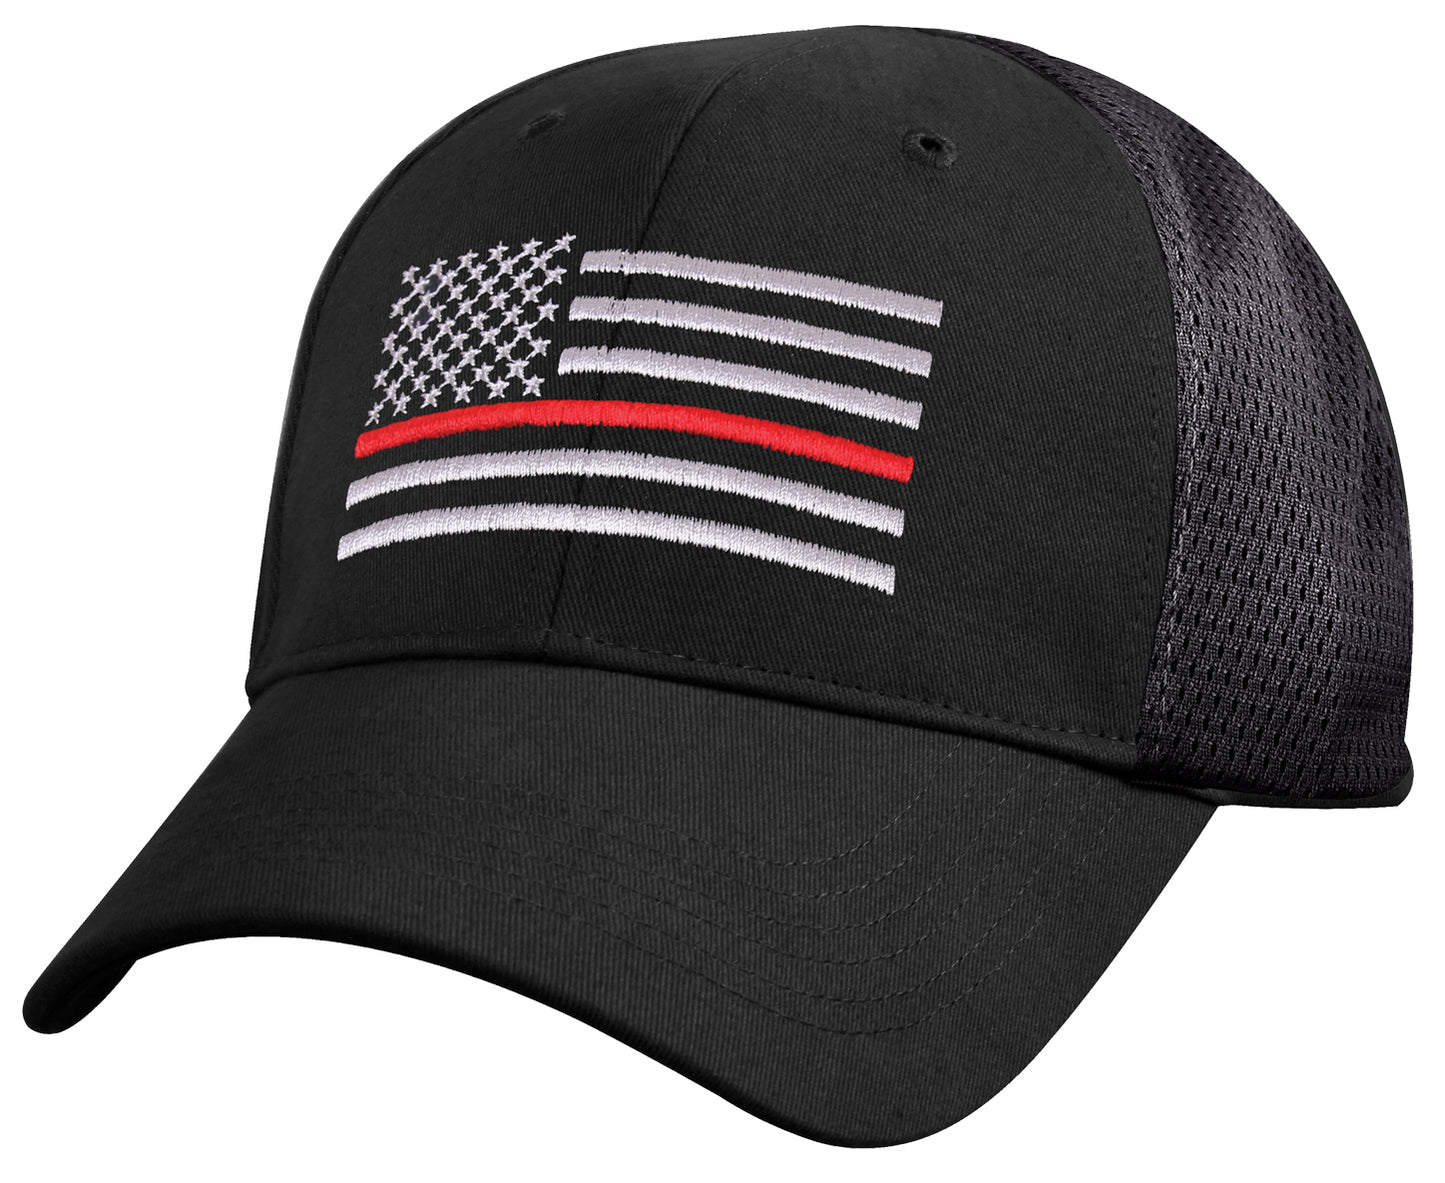 Thin Red Line Mesh Back Tactical Cap